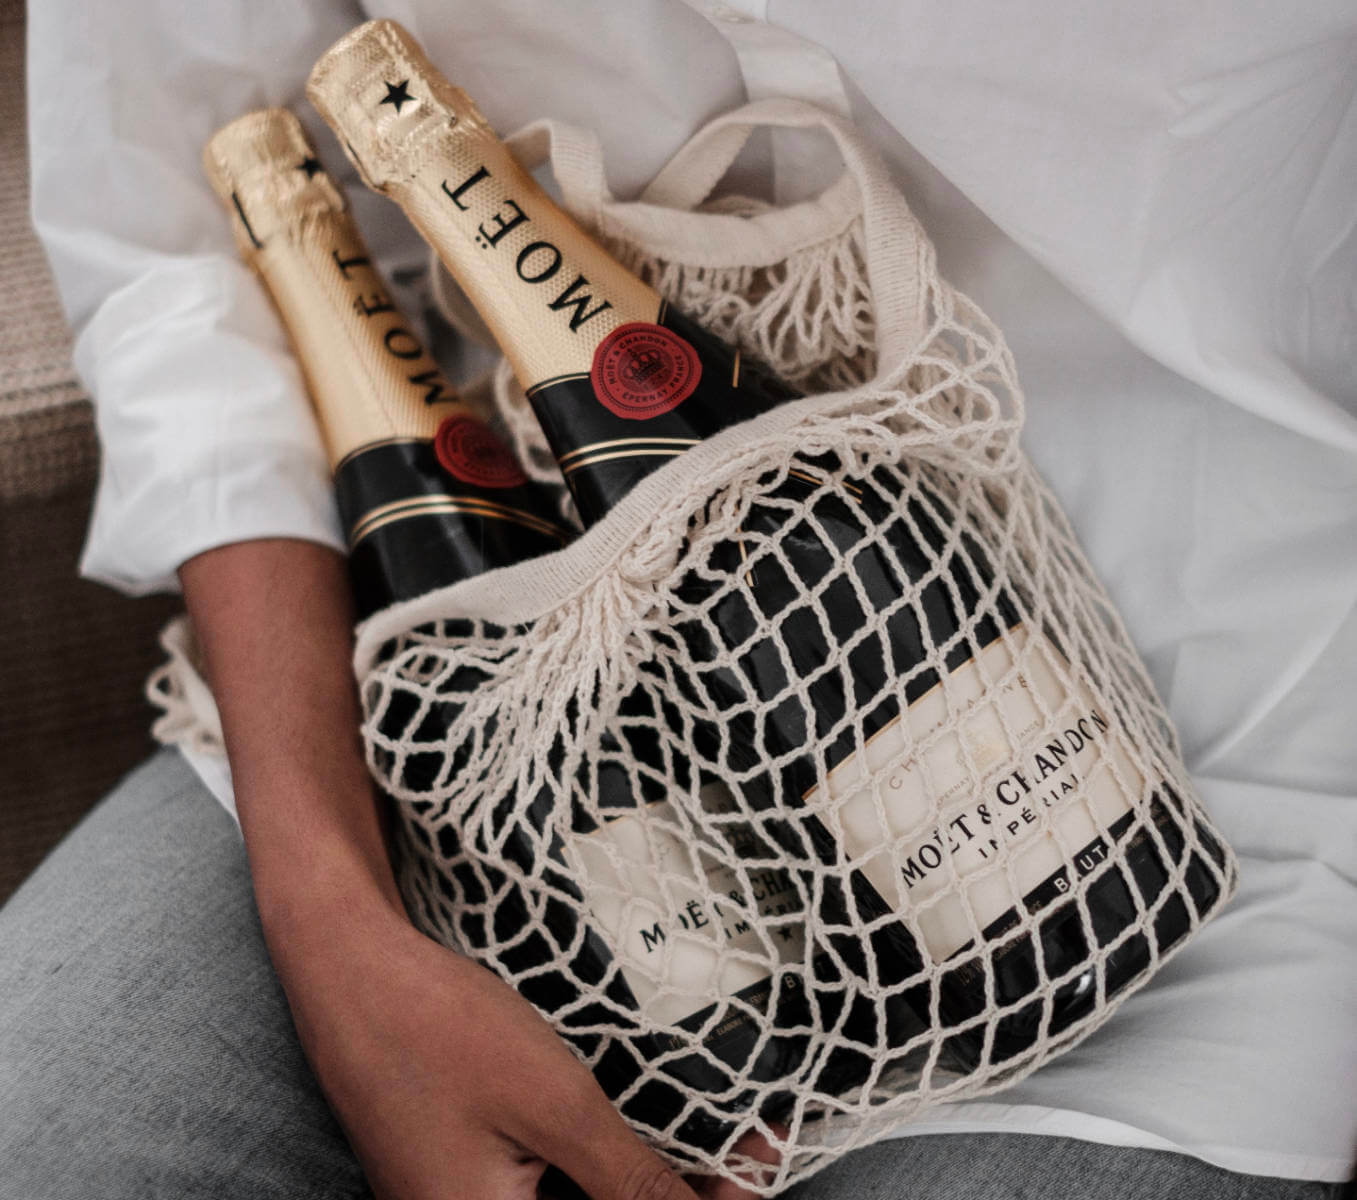 CHAMPAGNE AS A LUXURY EXTRA